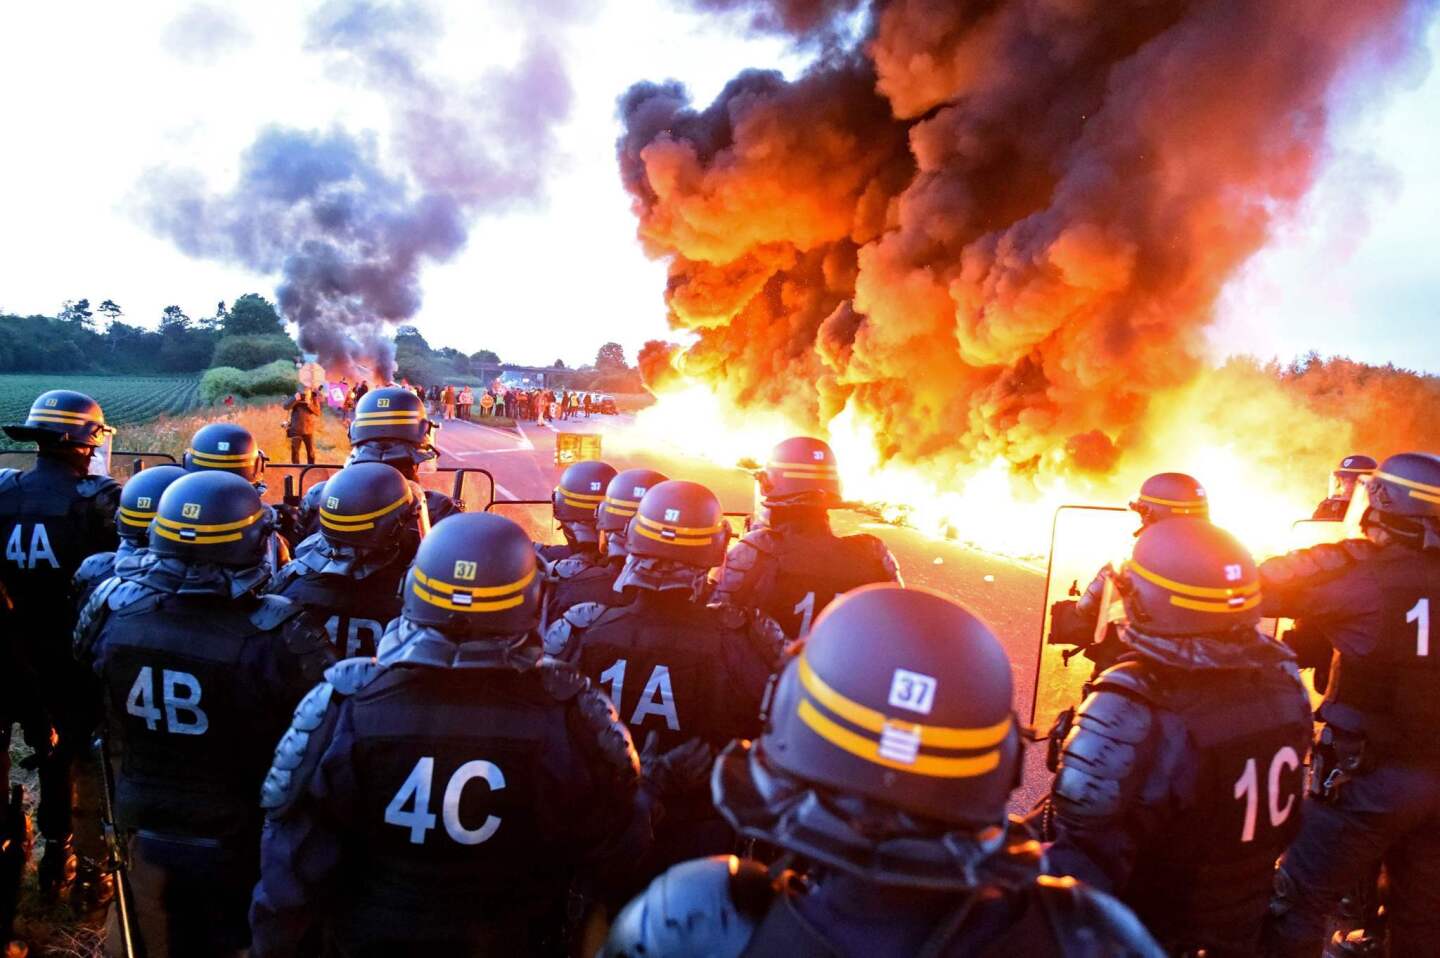 Riot police watch as a fire set by striking refinery workers burns during a blockade of the oil depot of Douchy-Les-Mines. Workers are protesting the government's proposed labor reforms.